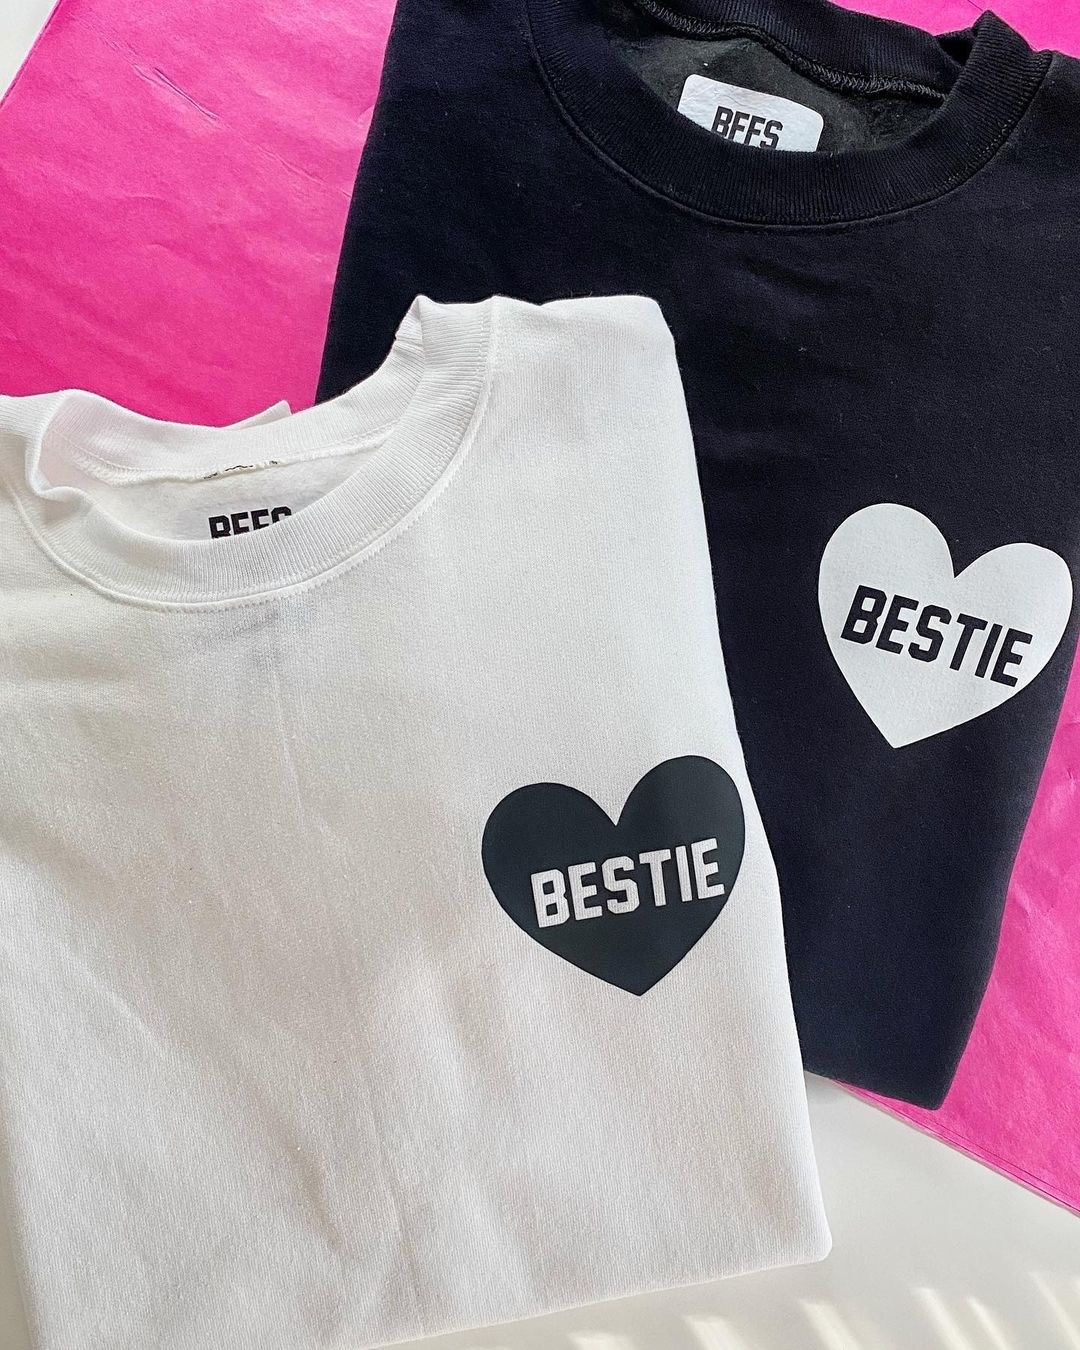 a white sweatshirt with a black heart that says bestie in it and a black one